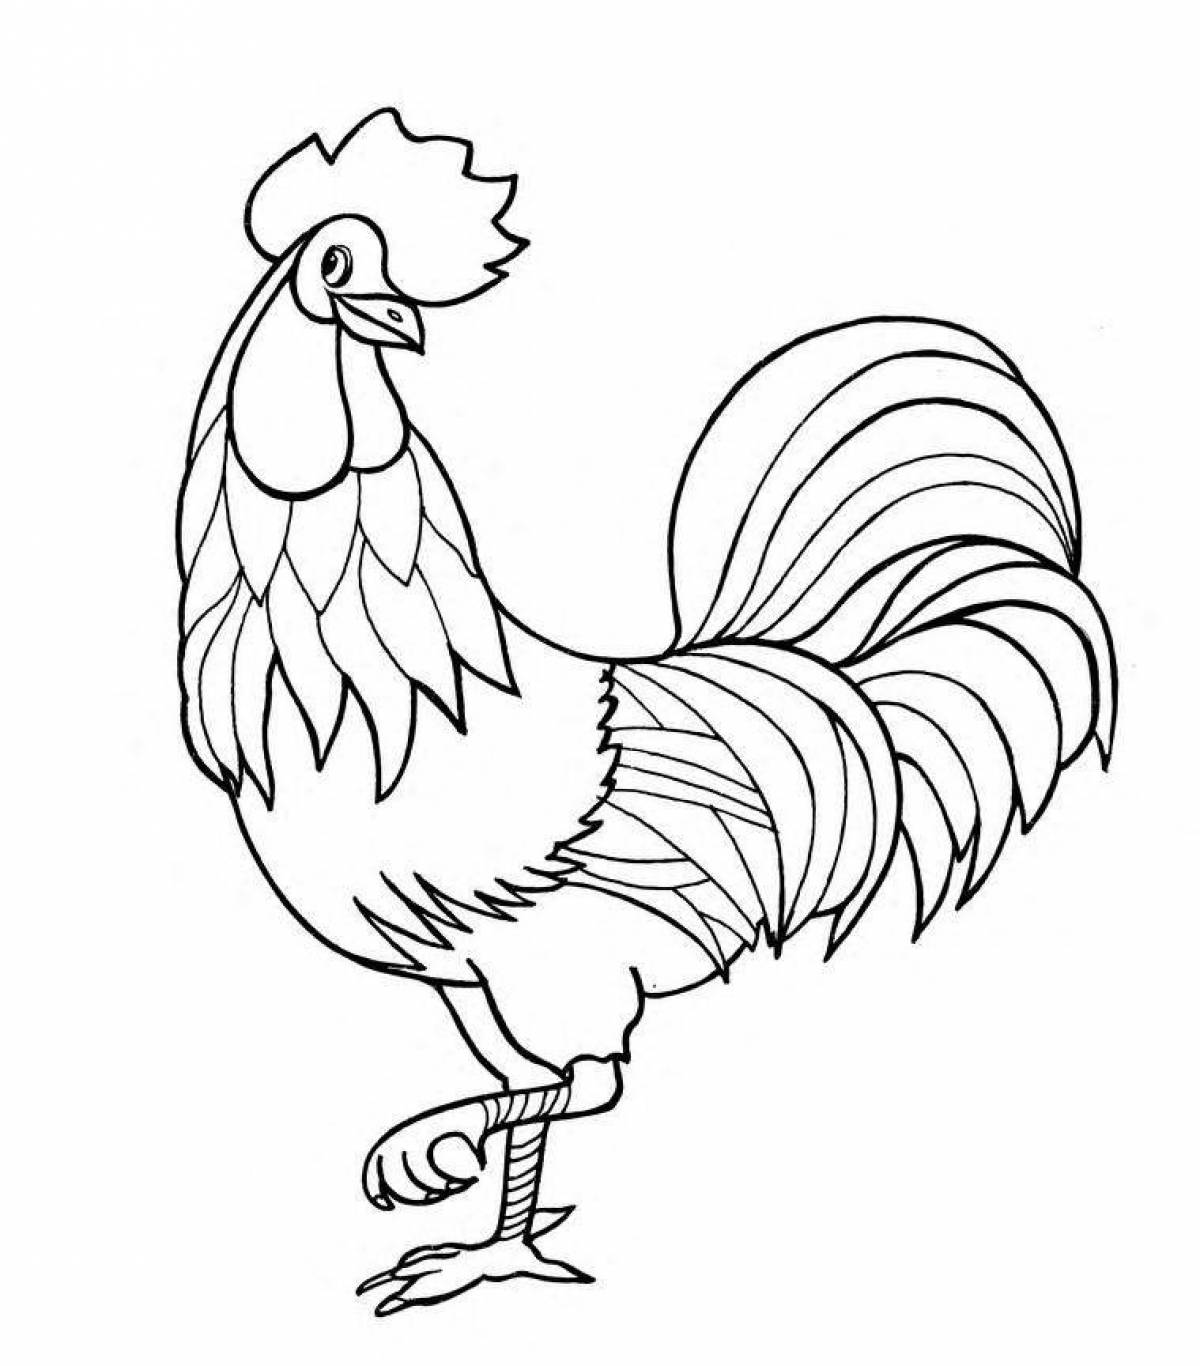 Children's cockerel coloring pages for kids